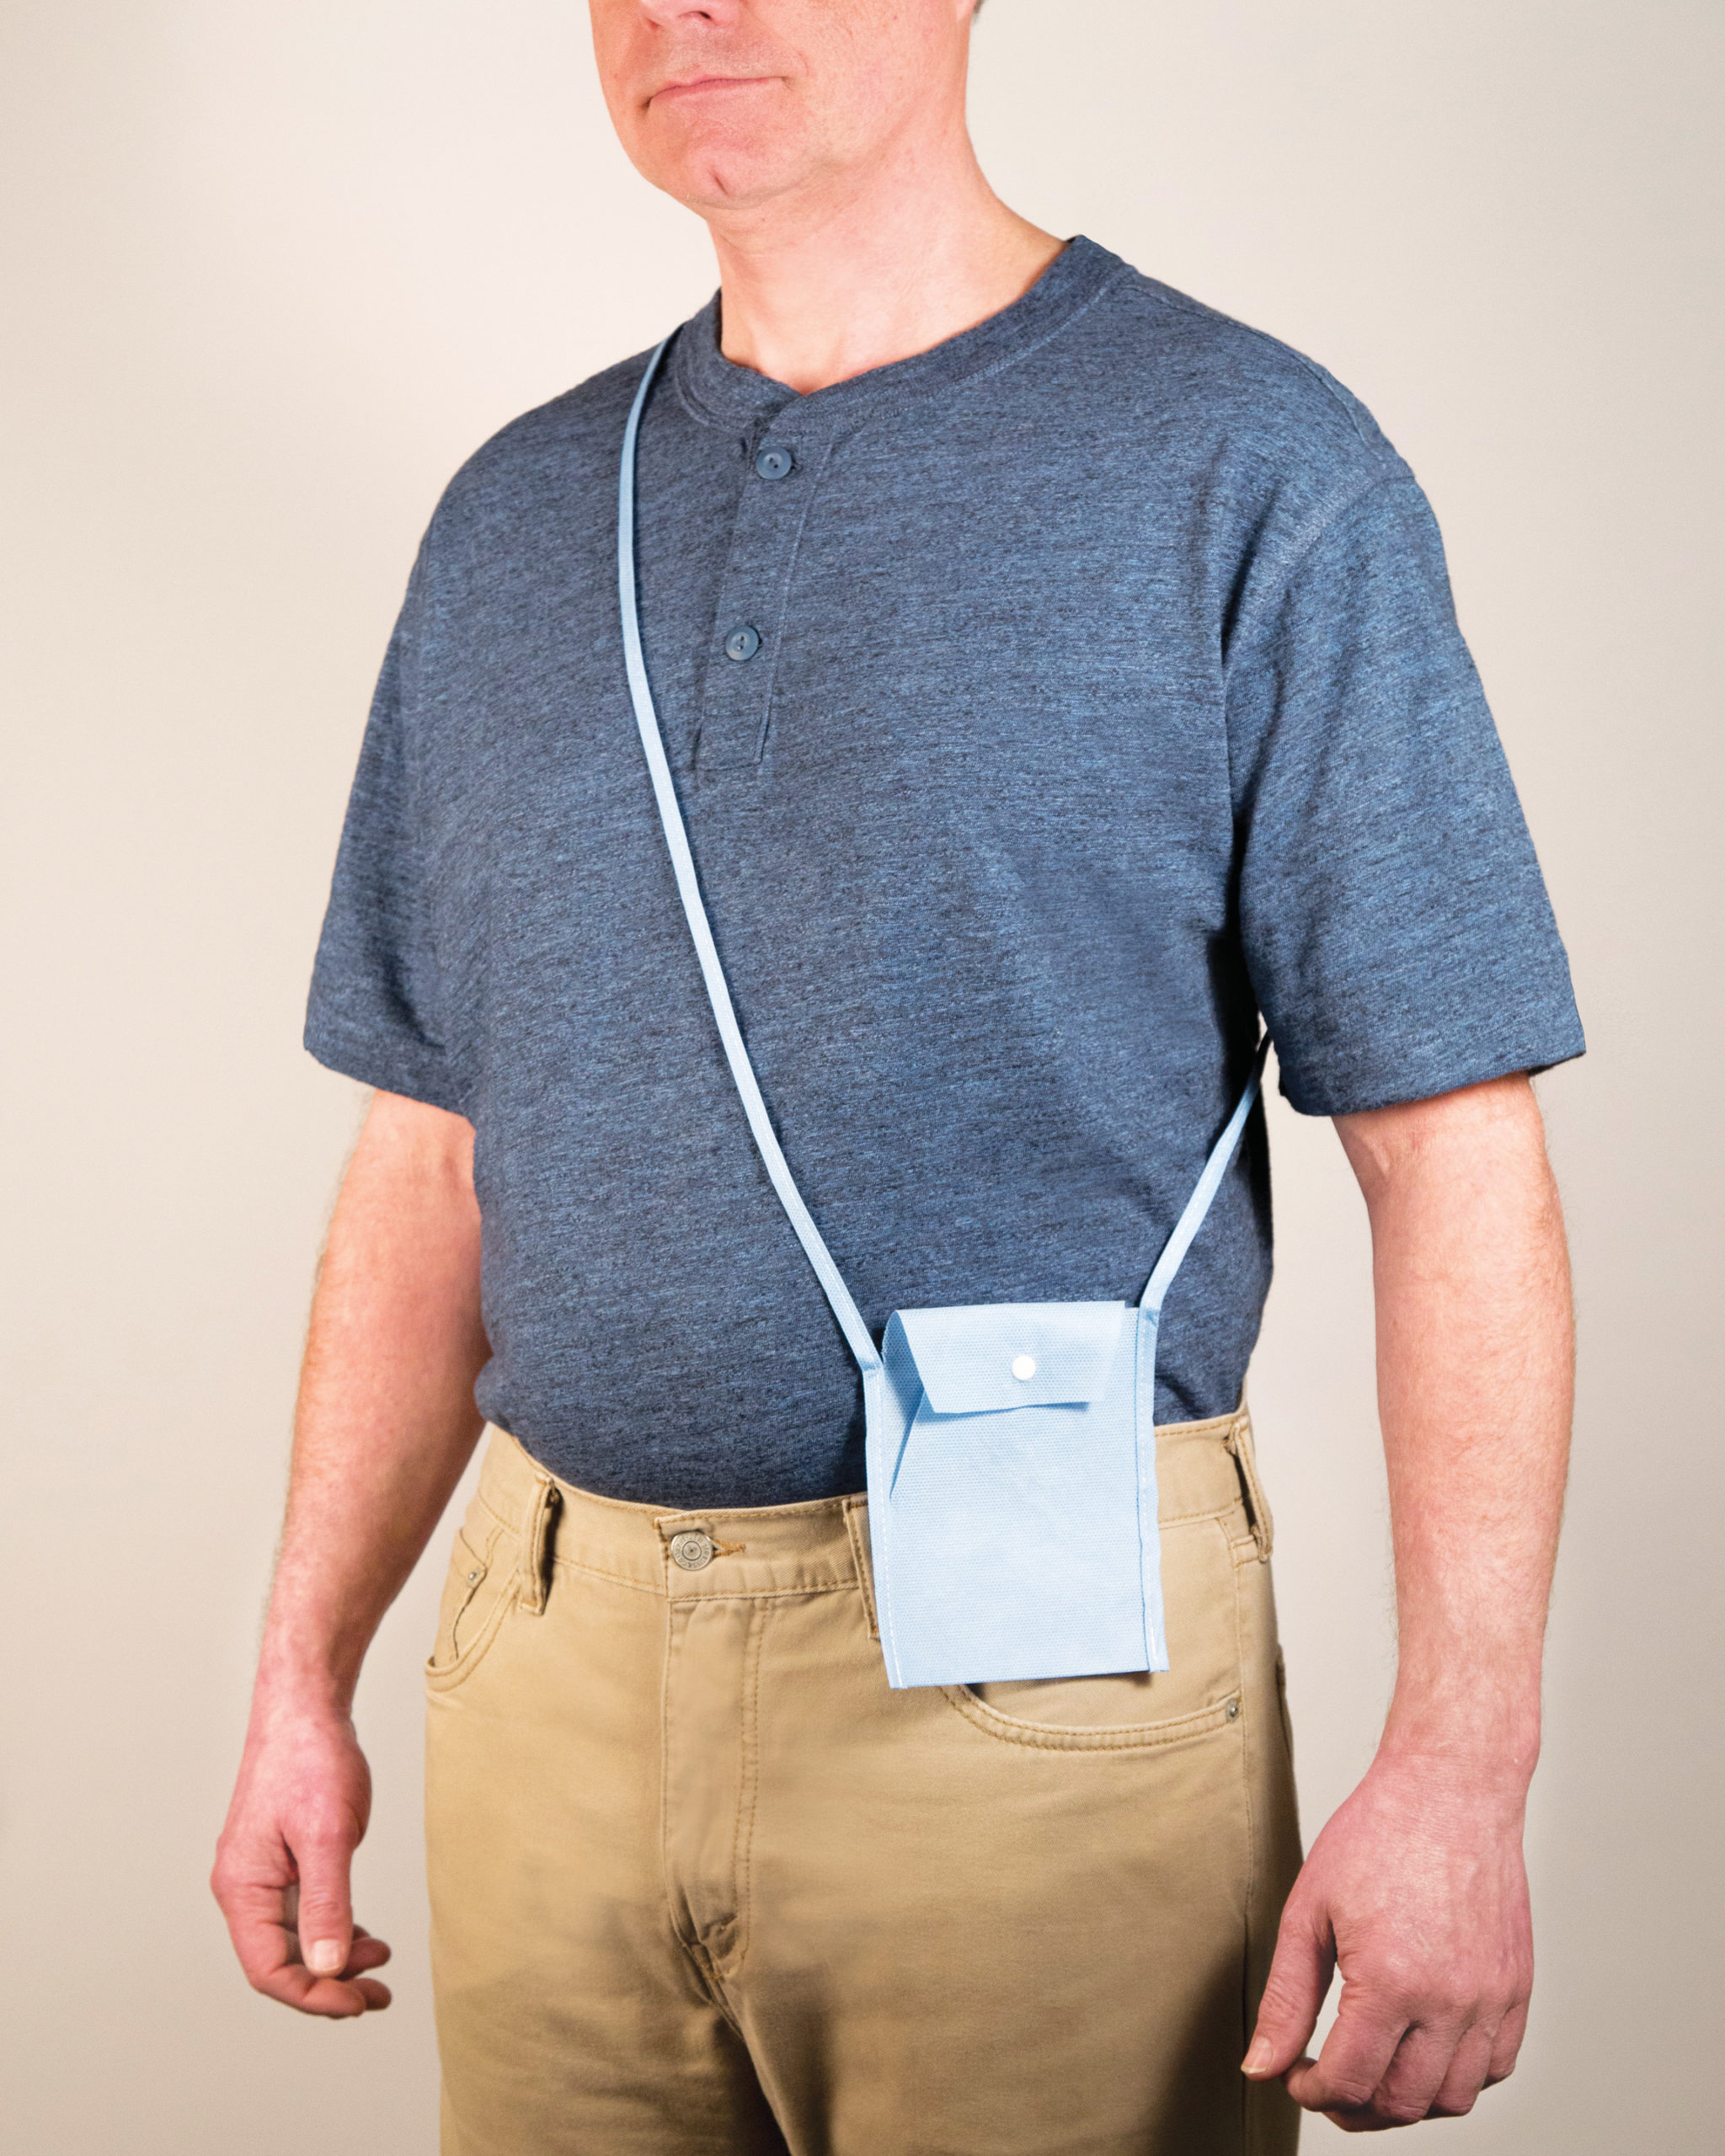 Cardiology Monitor Pouch